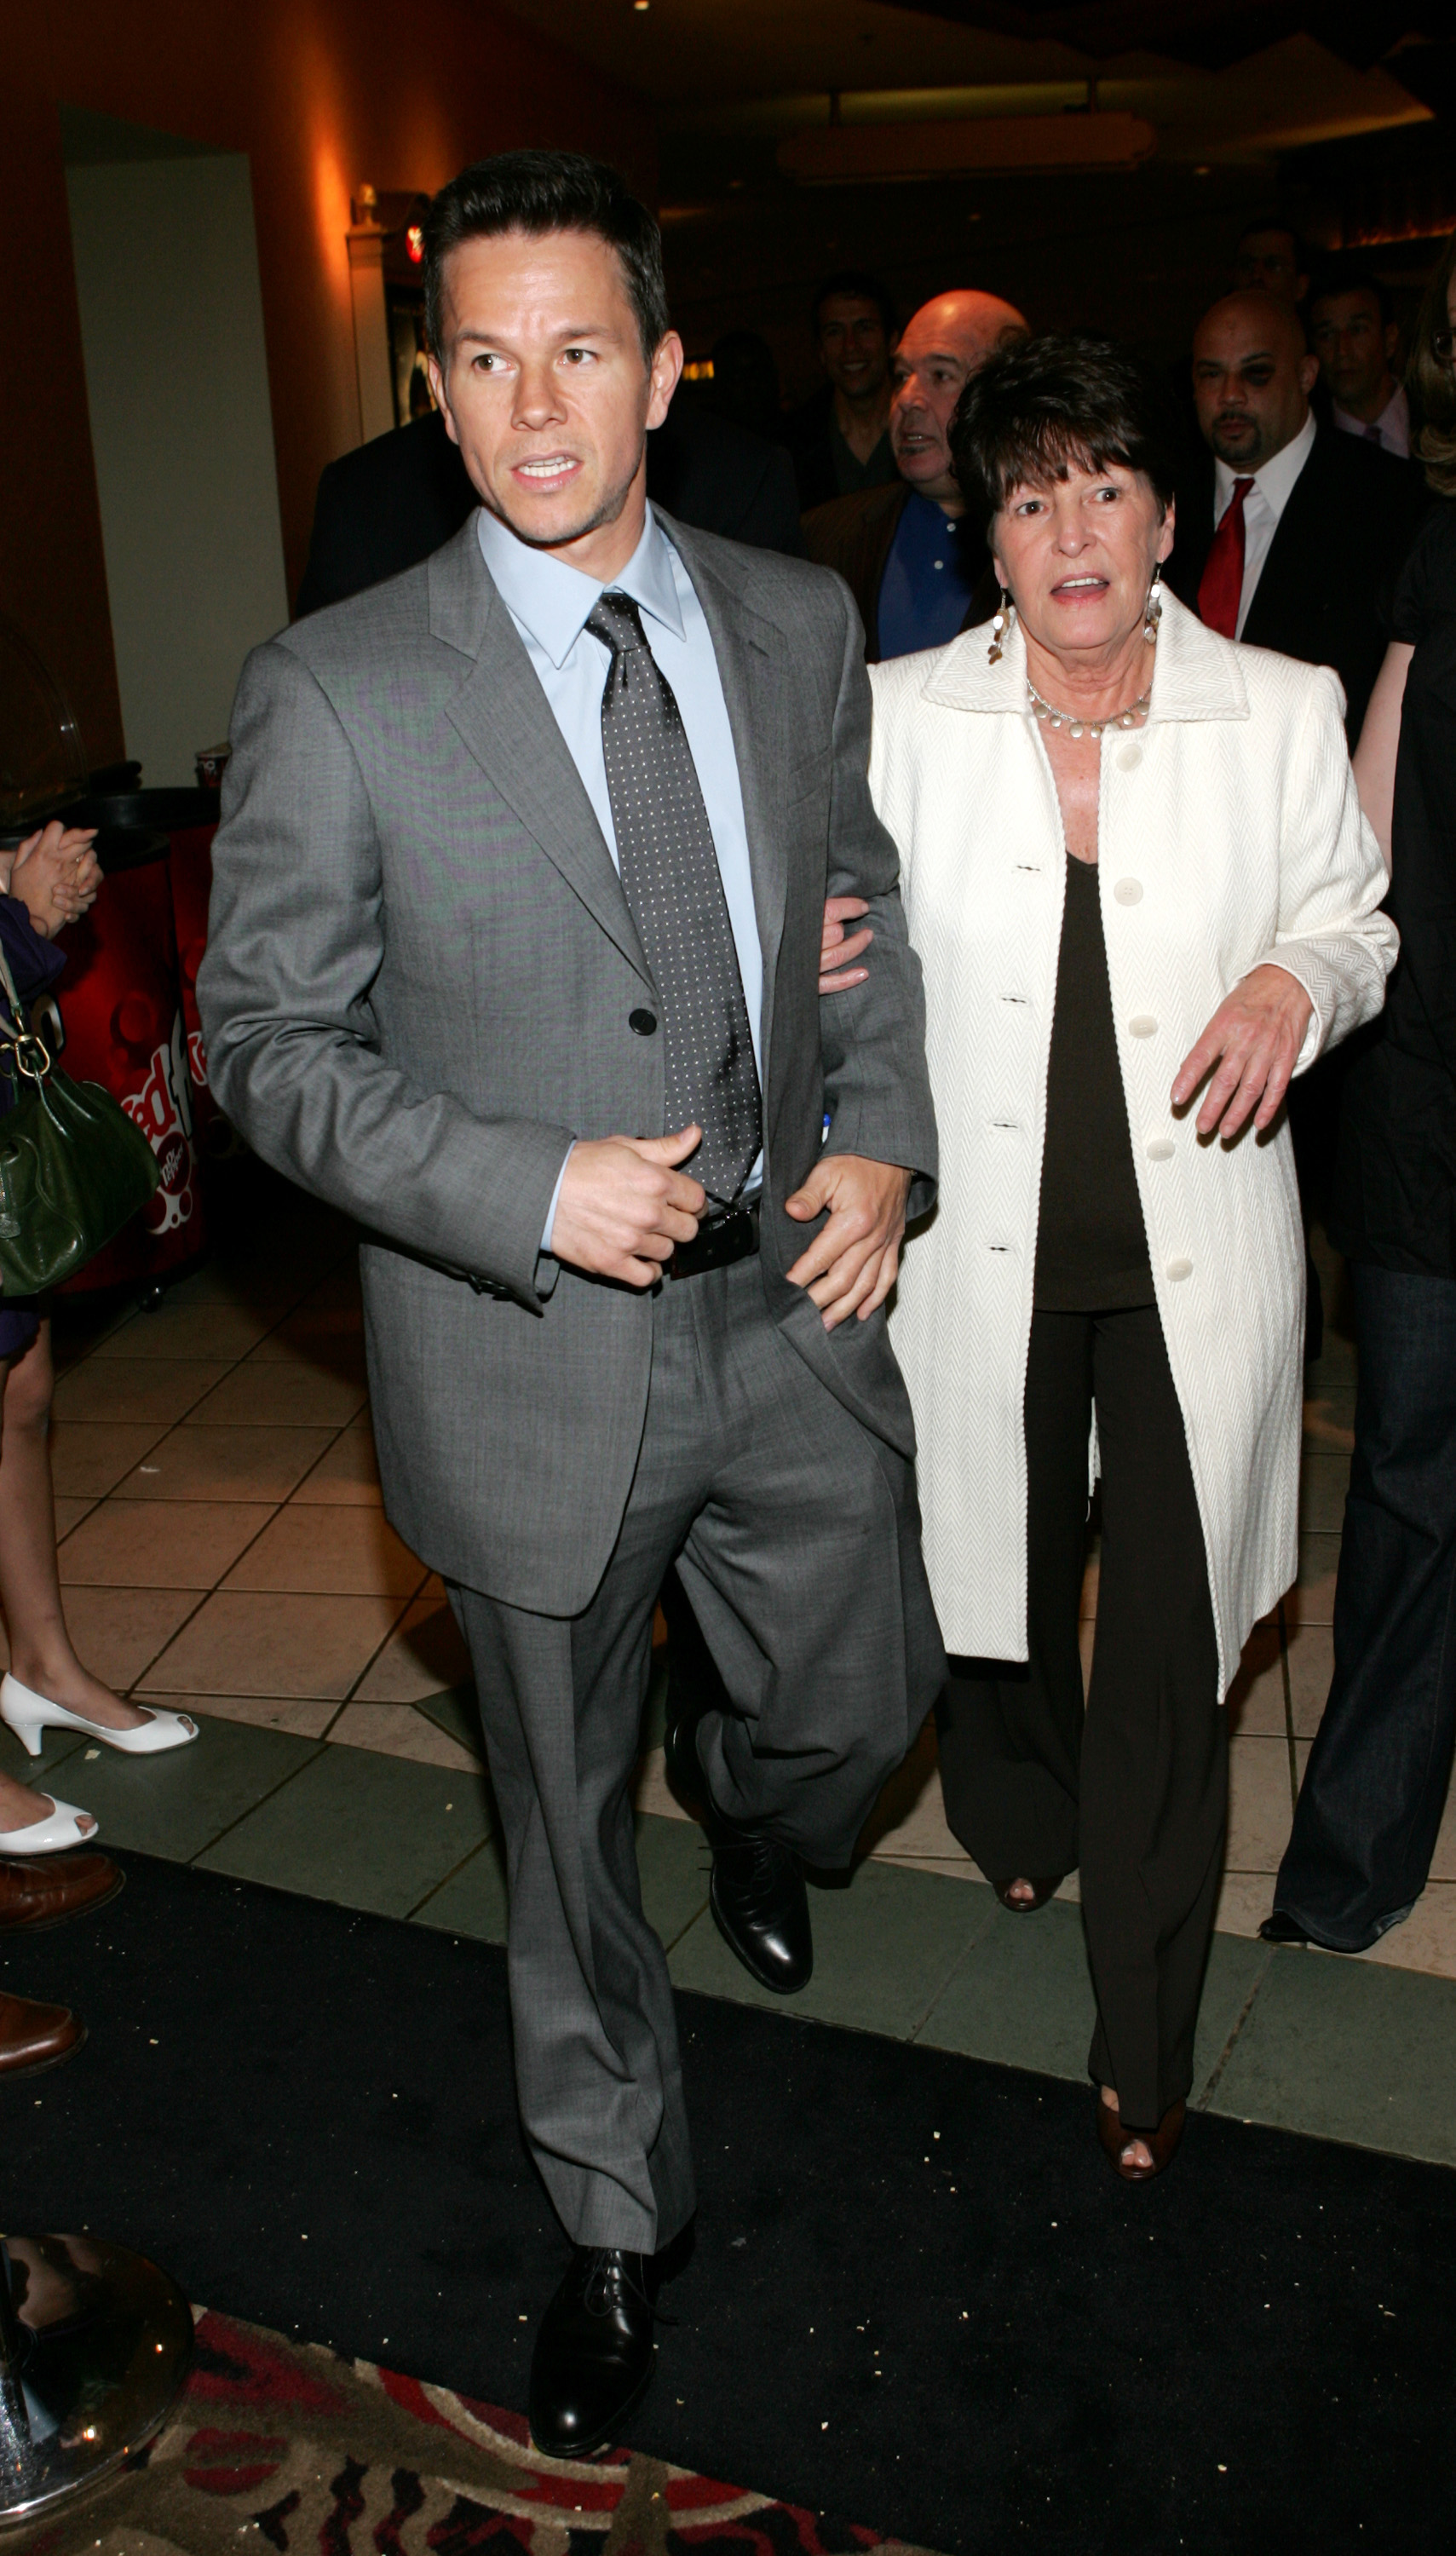 Mark Wahlberg and Alma Wahlberg during "Shooter" Premiere in Boston, Massachusetts on March 15, 2007 | Source: Getty Images